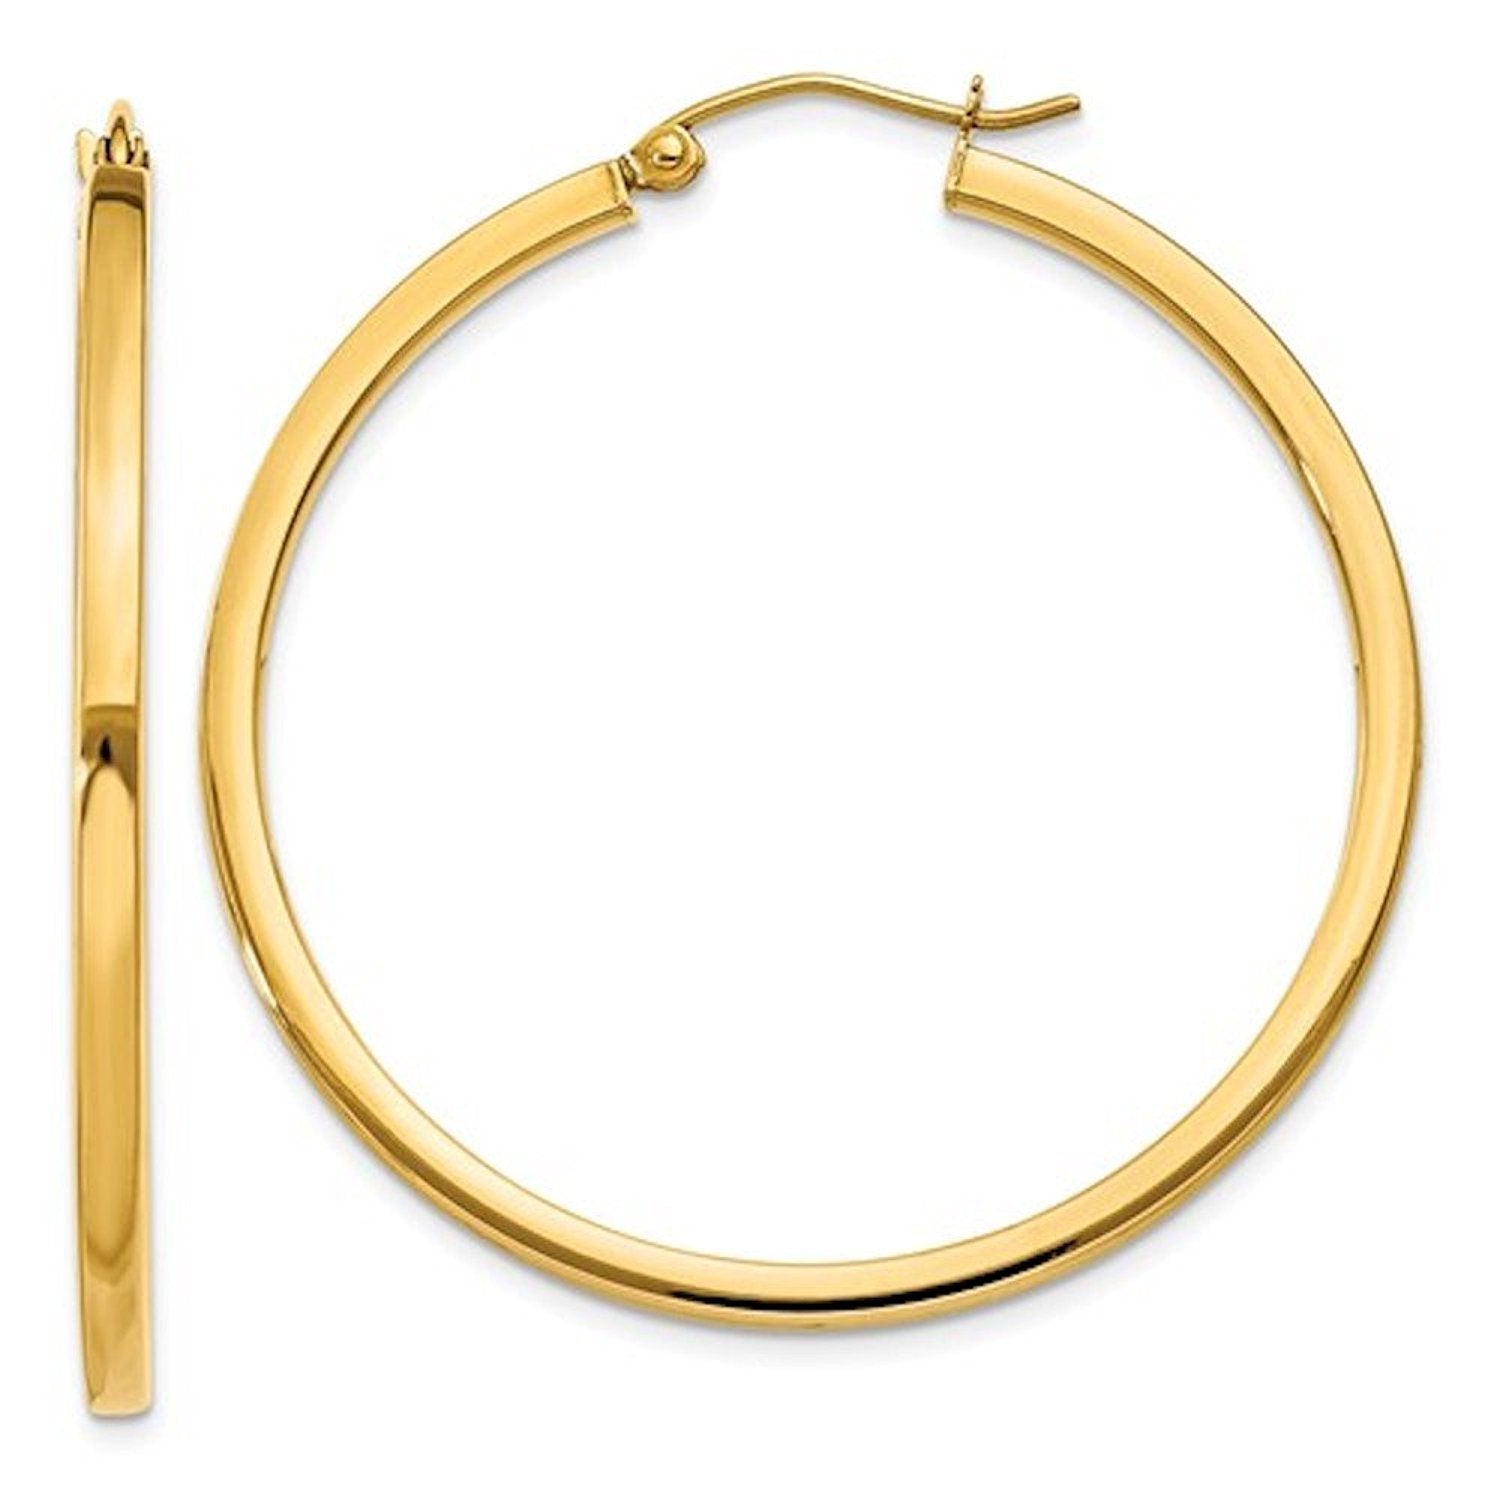 14k Yellow Gold Square Tube Round Hoop Earrings 40mm x 2mm